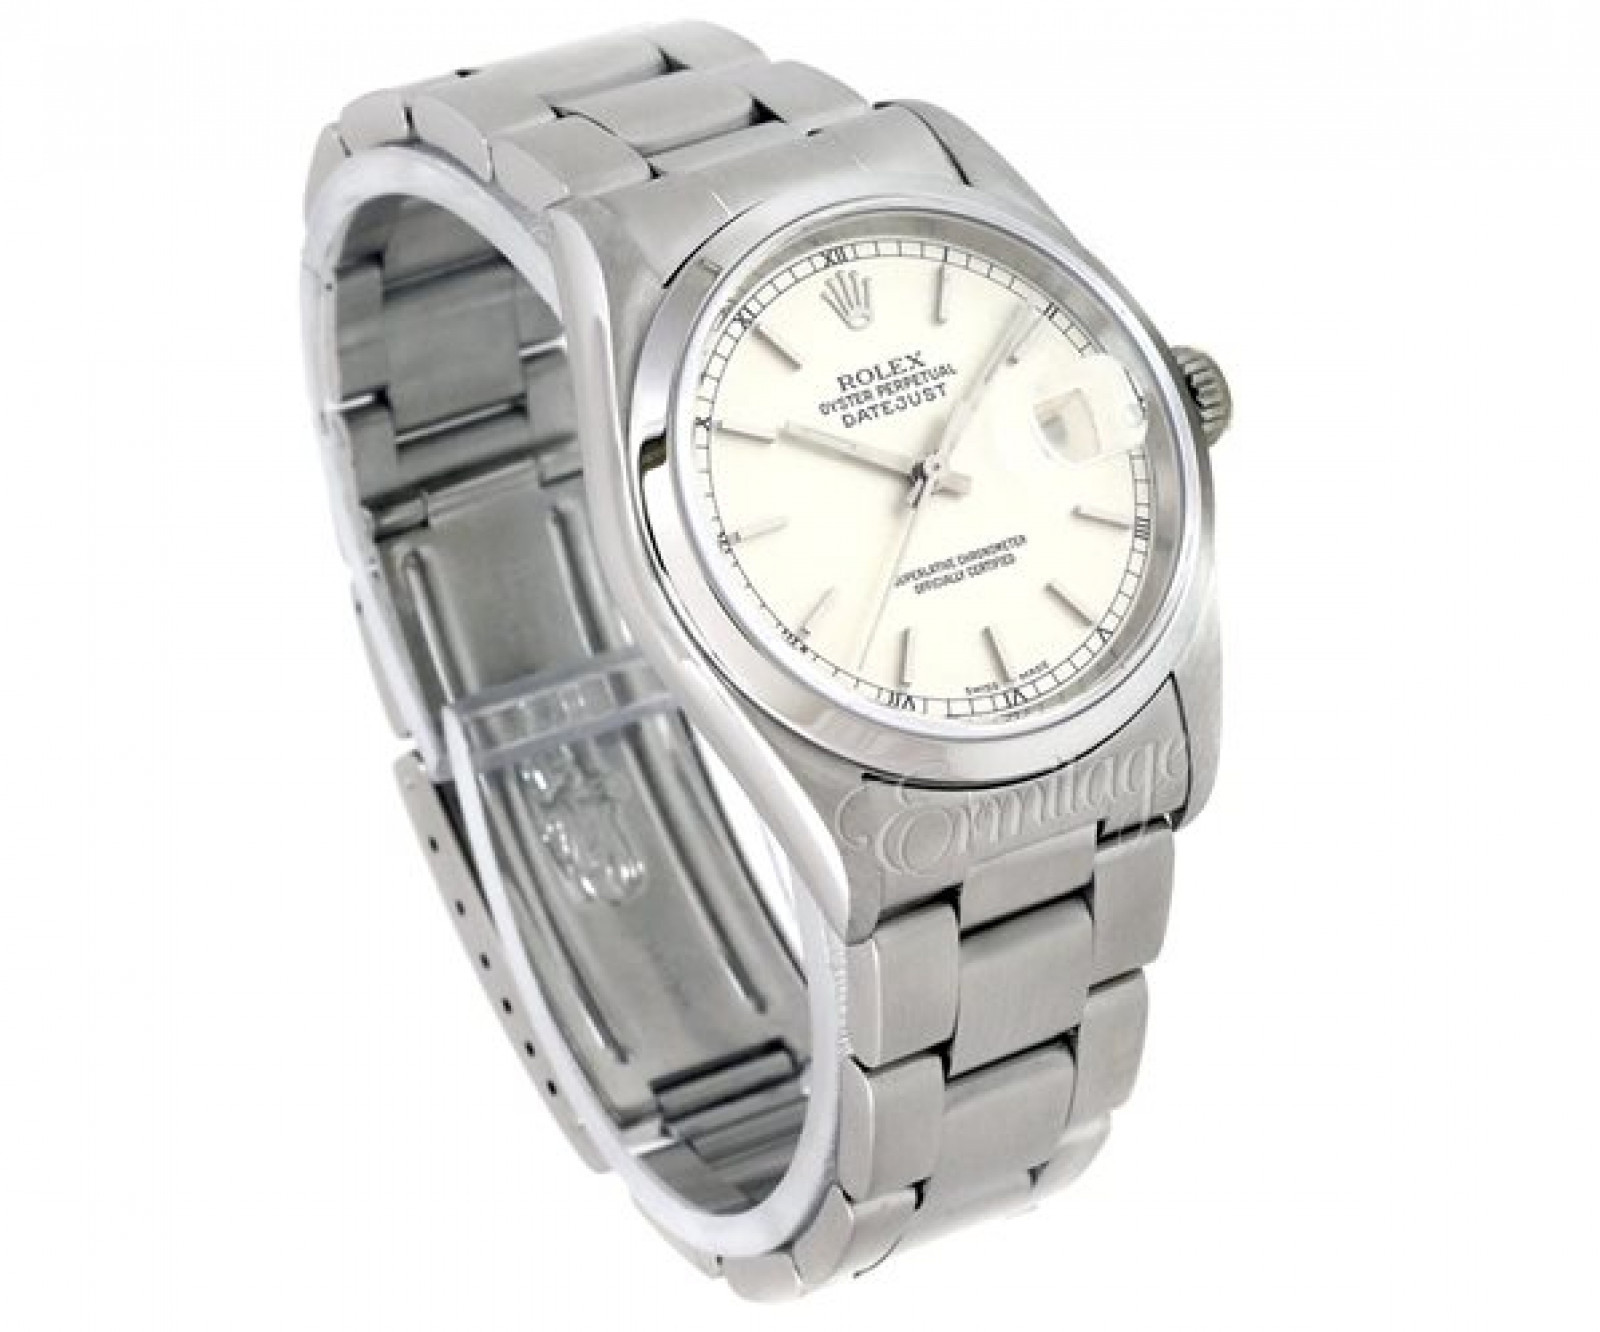 Rolex Datejust 16200 with Oyster Bracelet